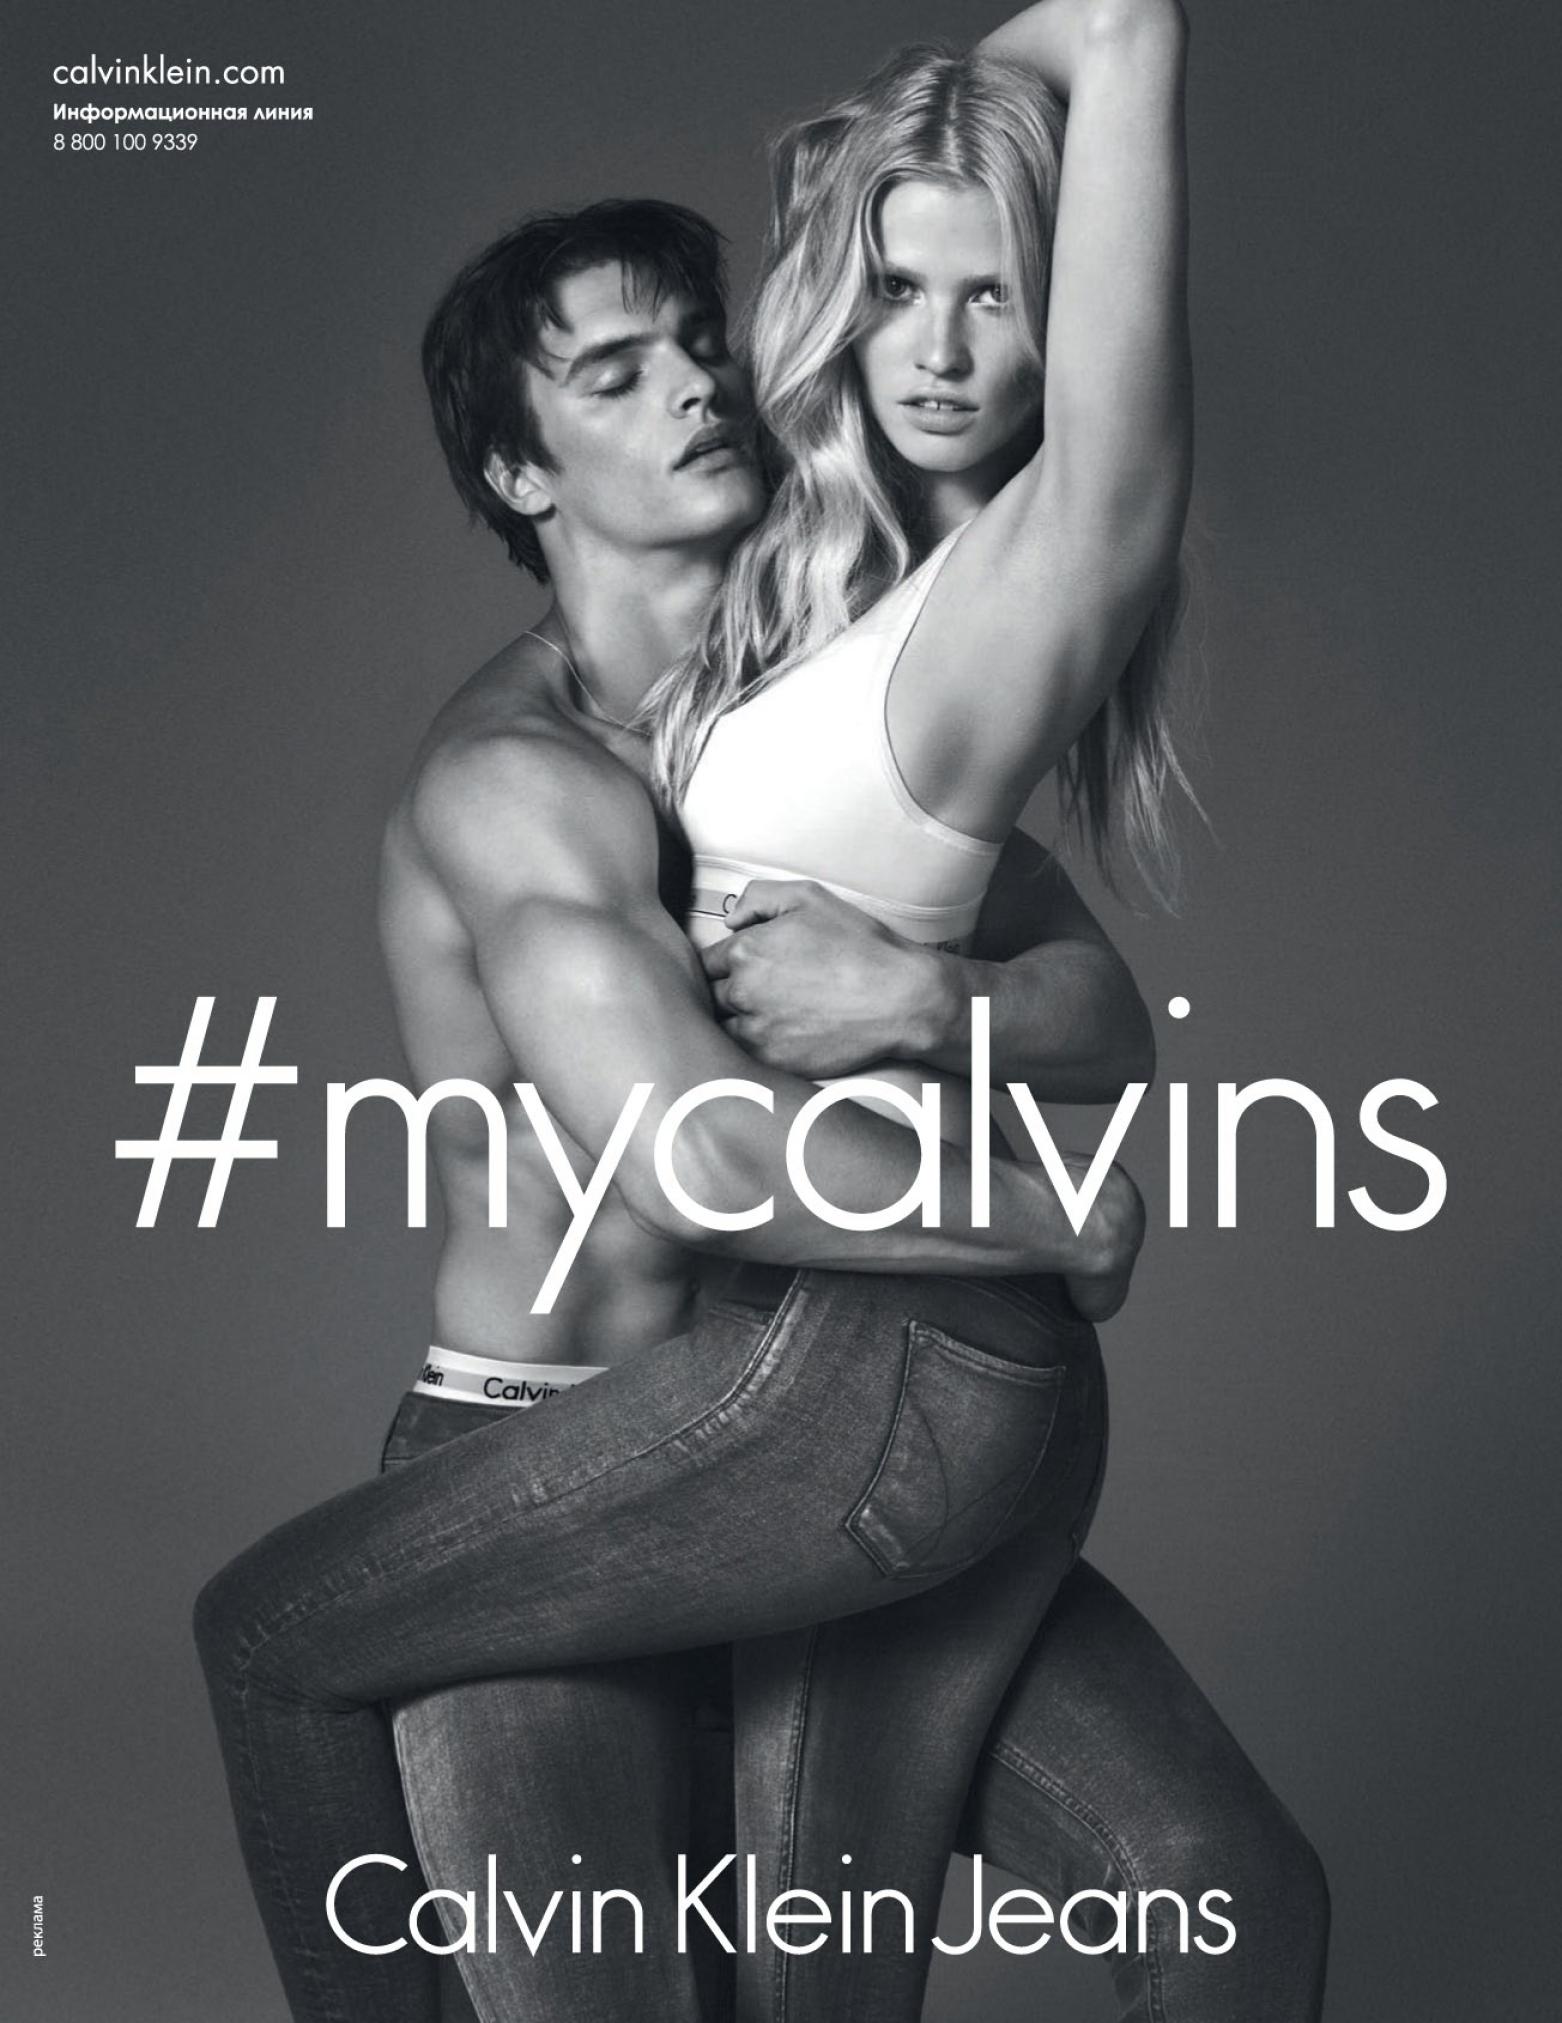 New Photo from Calvin Klein Jeans Fall 2014 Campaign with Matthew